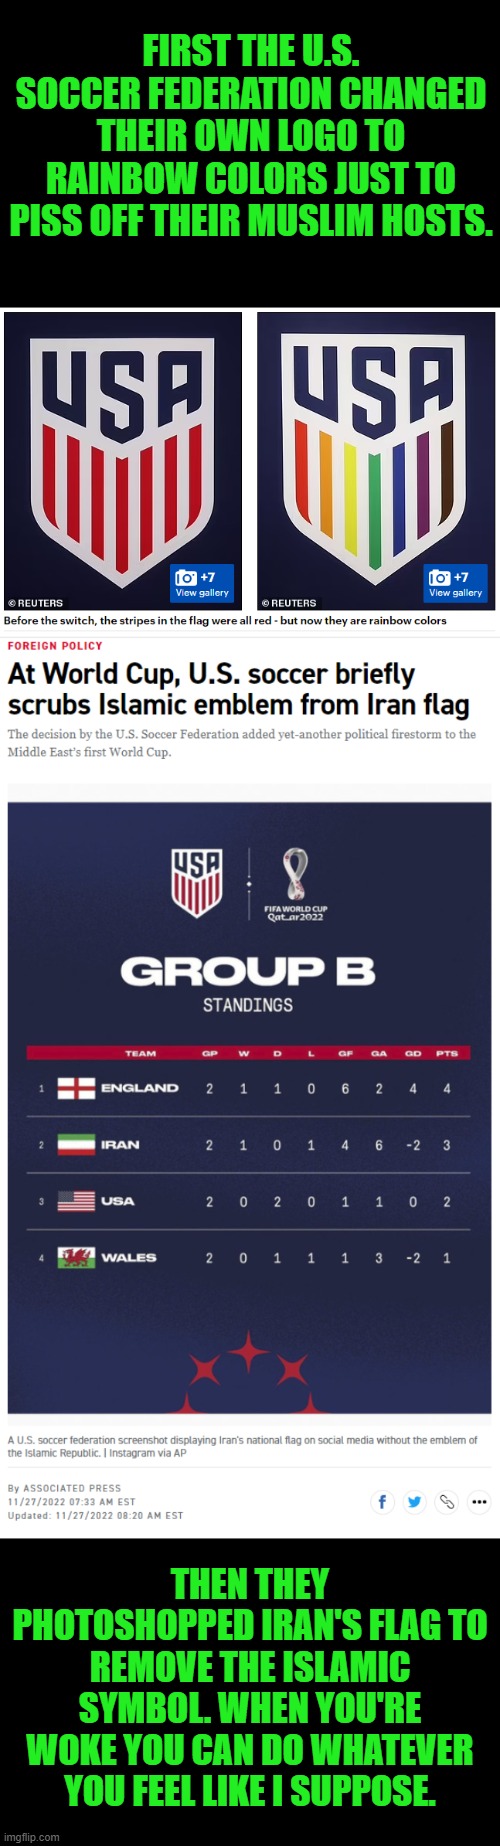 I'm no big fan of Qatar or Iran, but I'd be pissed if they came here & pulled these shenanigans | FIRST THE U.S. SOCCER FEDERATION CHANGED THEIR OWN LOGO TO RAINBOW COLORS JUST TO PISS OFF THEIR MUSLIM HOSTS. THEN THEY PHOTOSHOPPED IRAN'S FLAG TO REMOVE THE ISLAMIC SYMBOL. WHEN YOU'RE WOKE YOU CAN DO WHATEVER YOU FEEL LIKE I SUPPOSE. | image tagged in world cup,soccer,football,woke | made w/ Imgflip meme maker